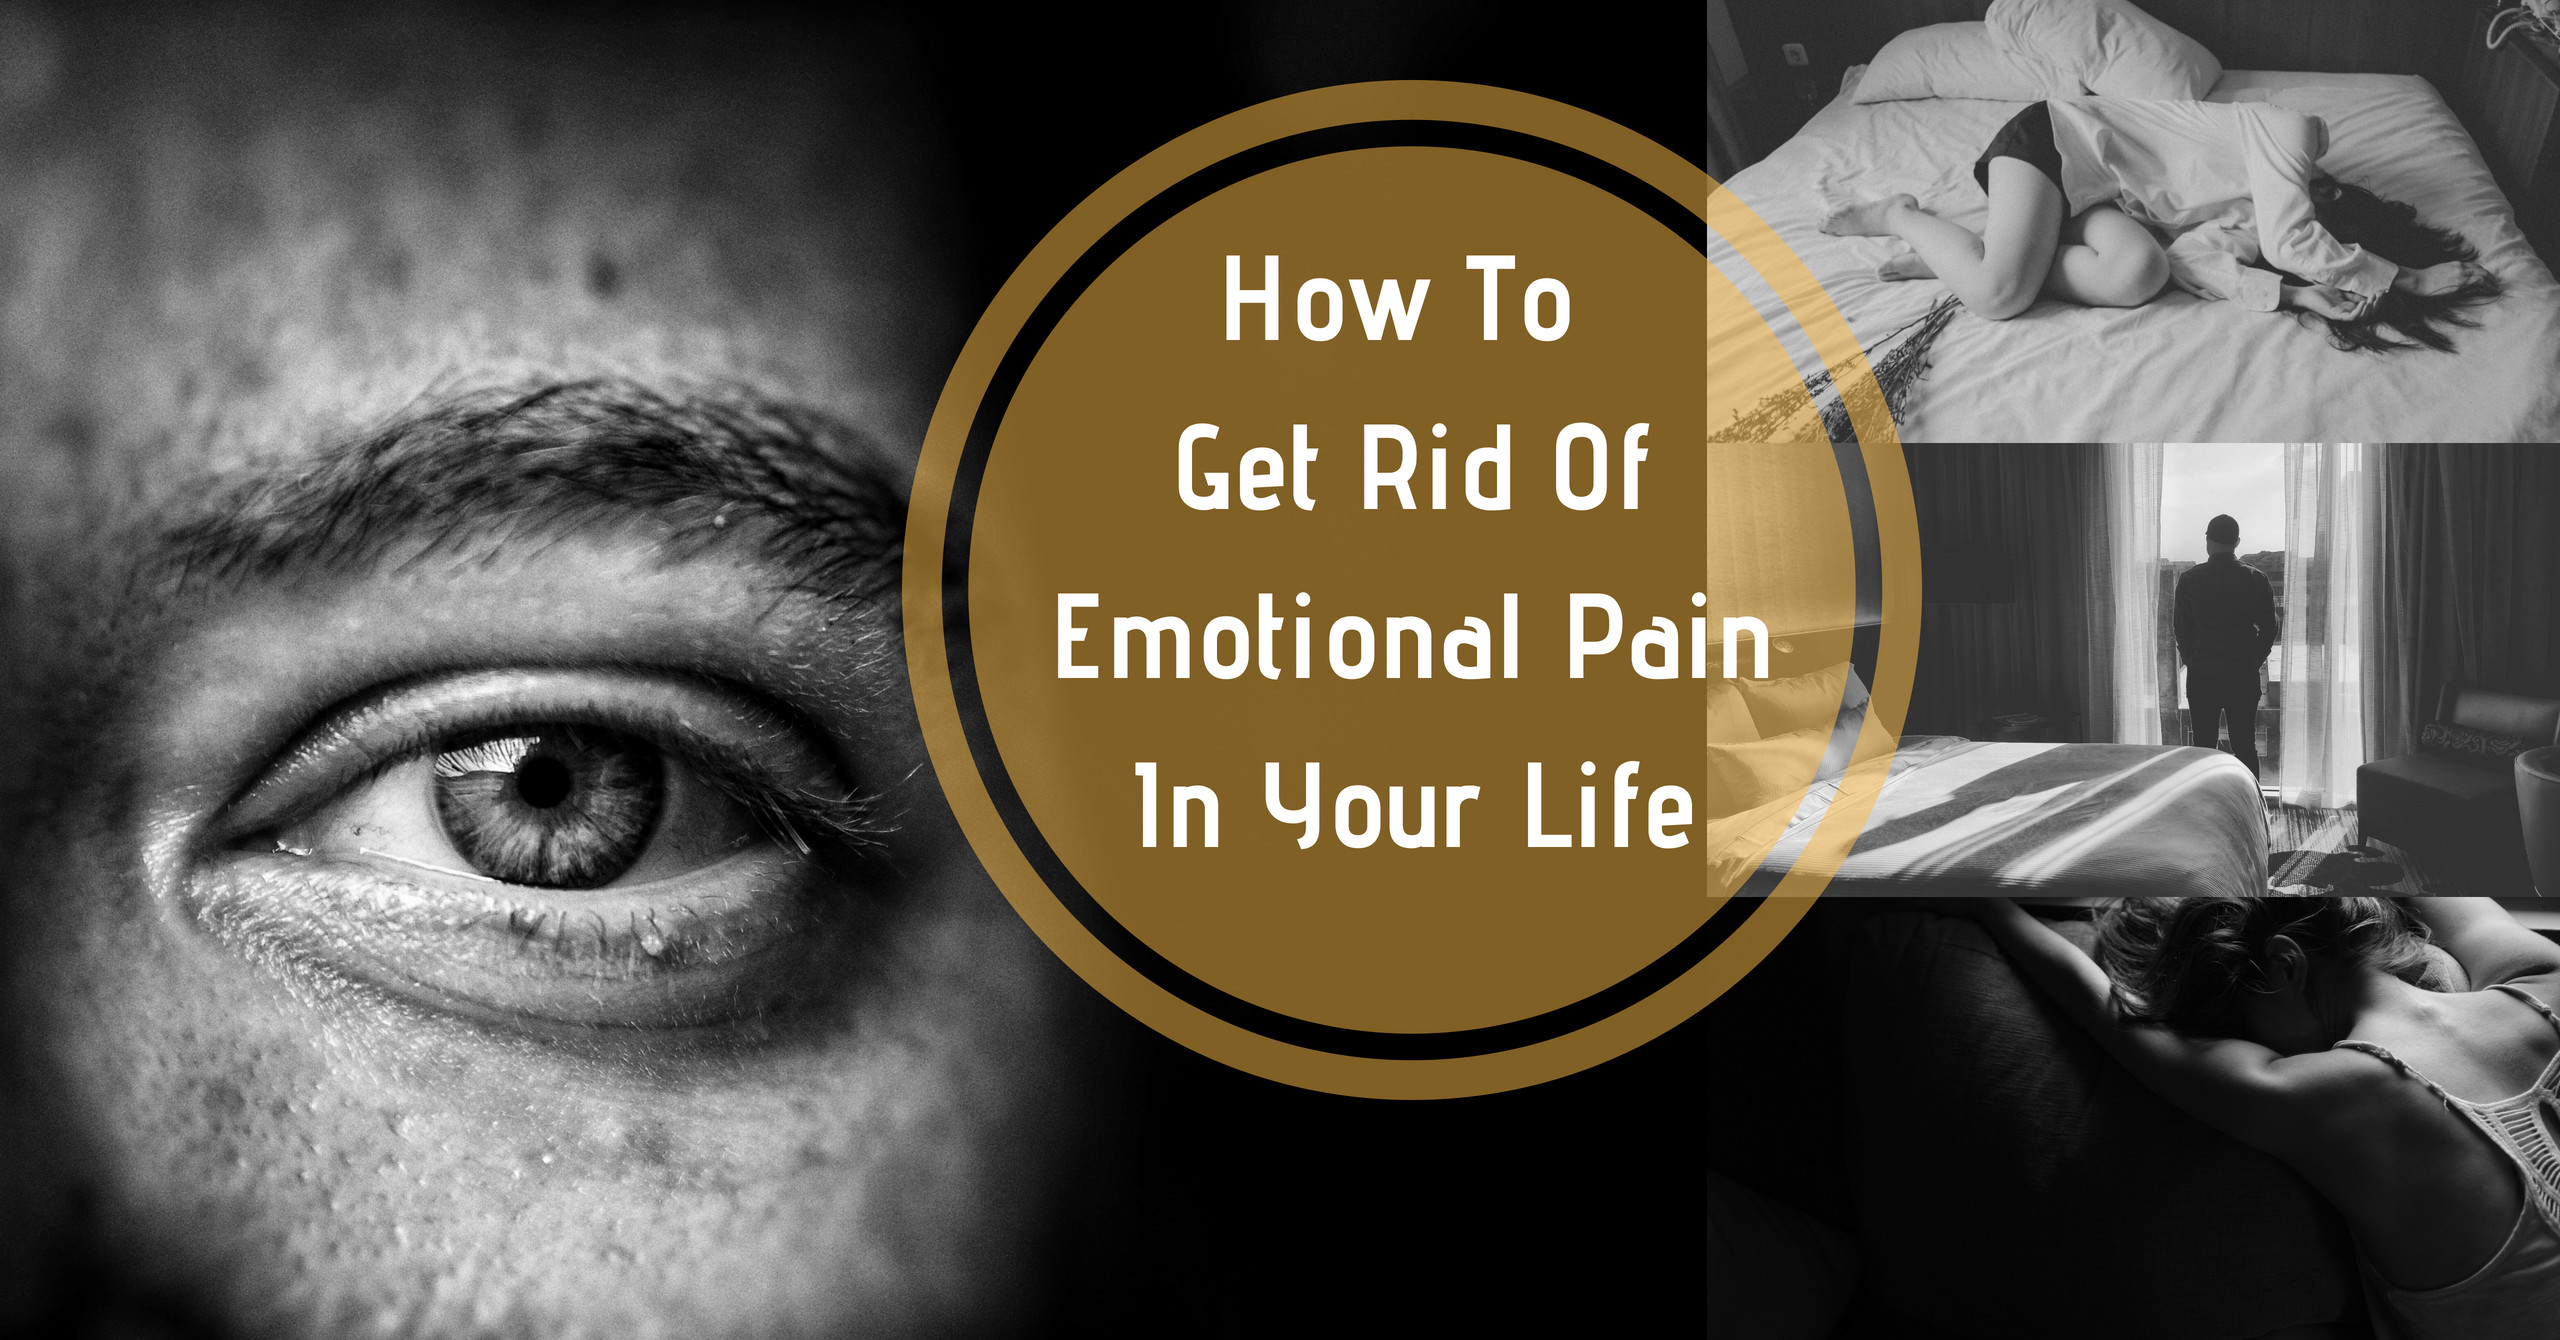 How To Get Rid Of Emotional Pain In Your Life